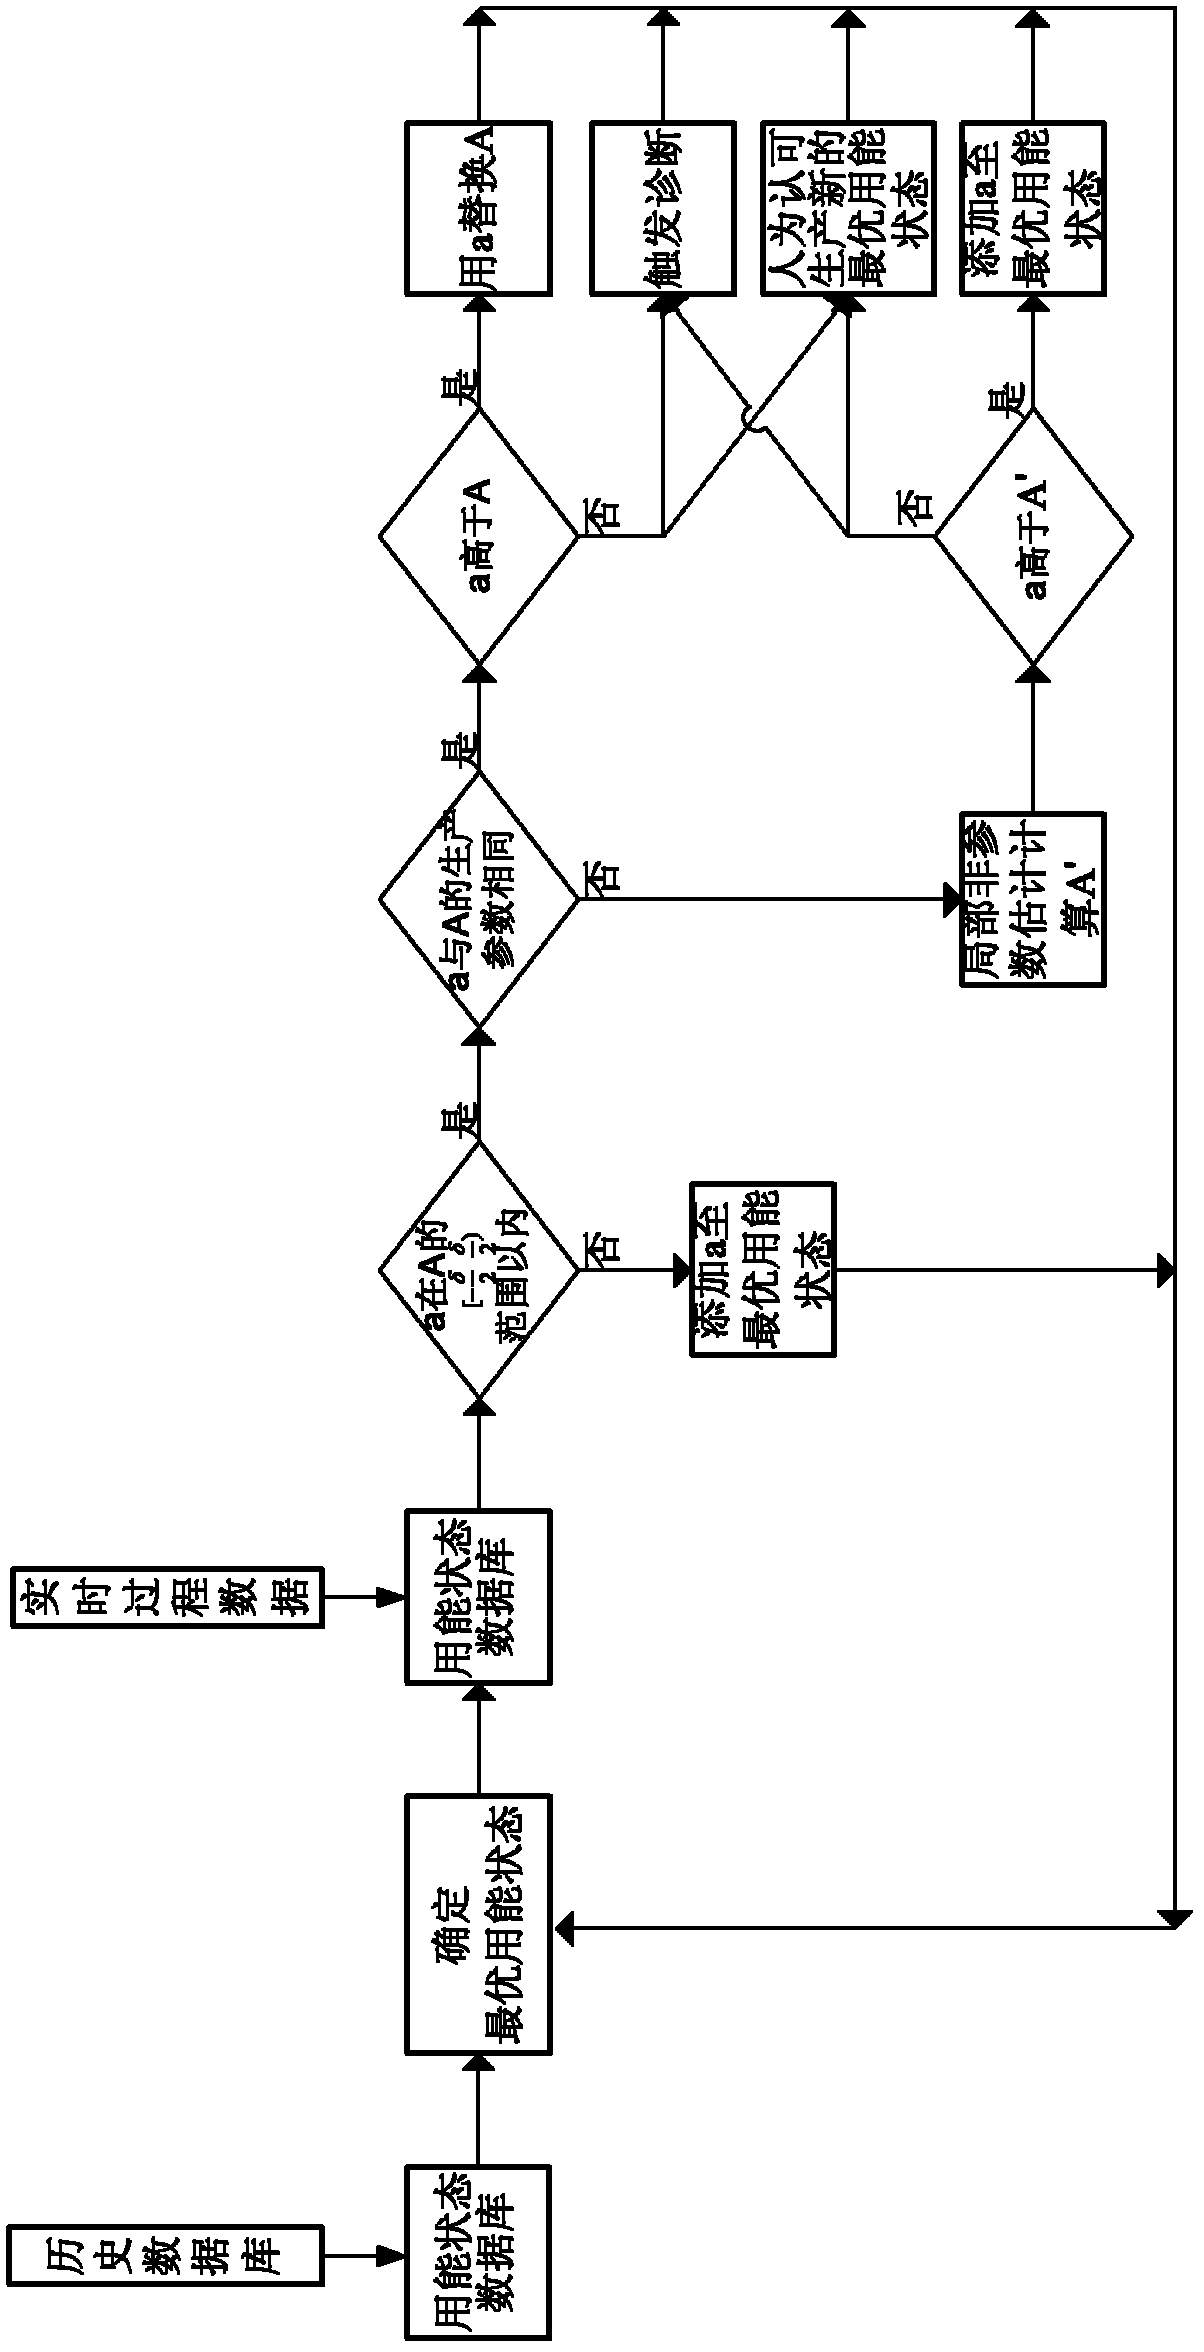 Energy utilization state diagnosis method for process industrial equipment